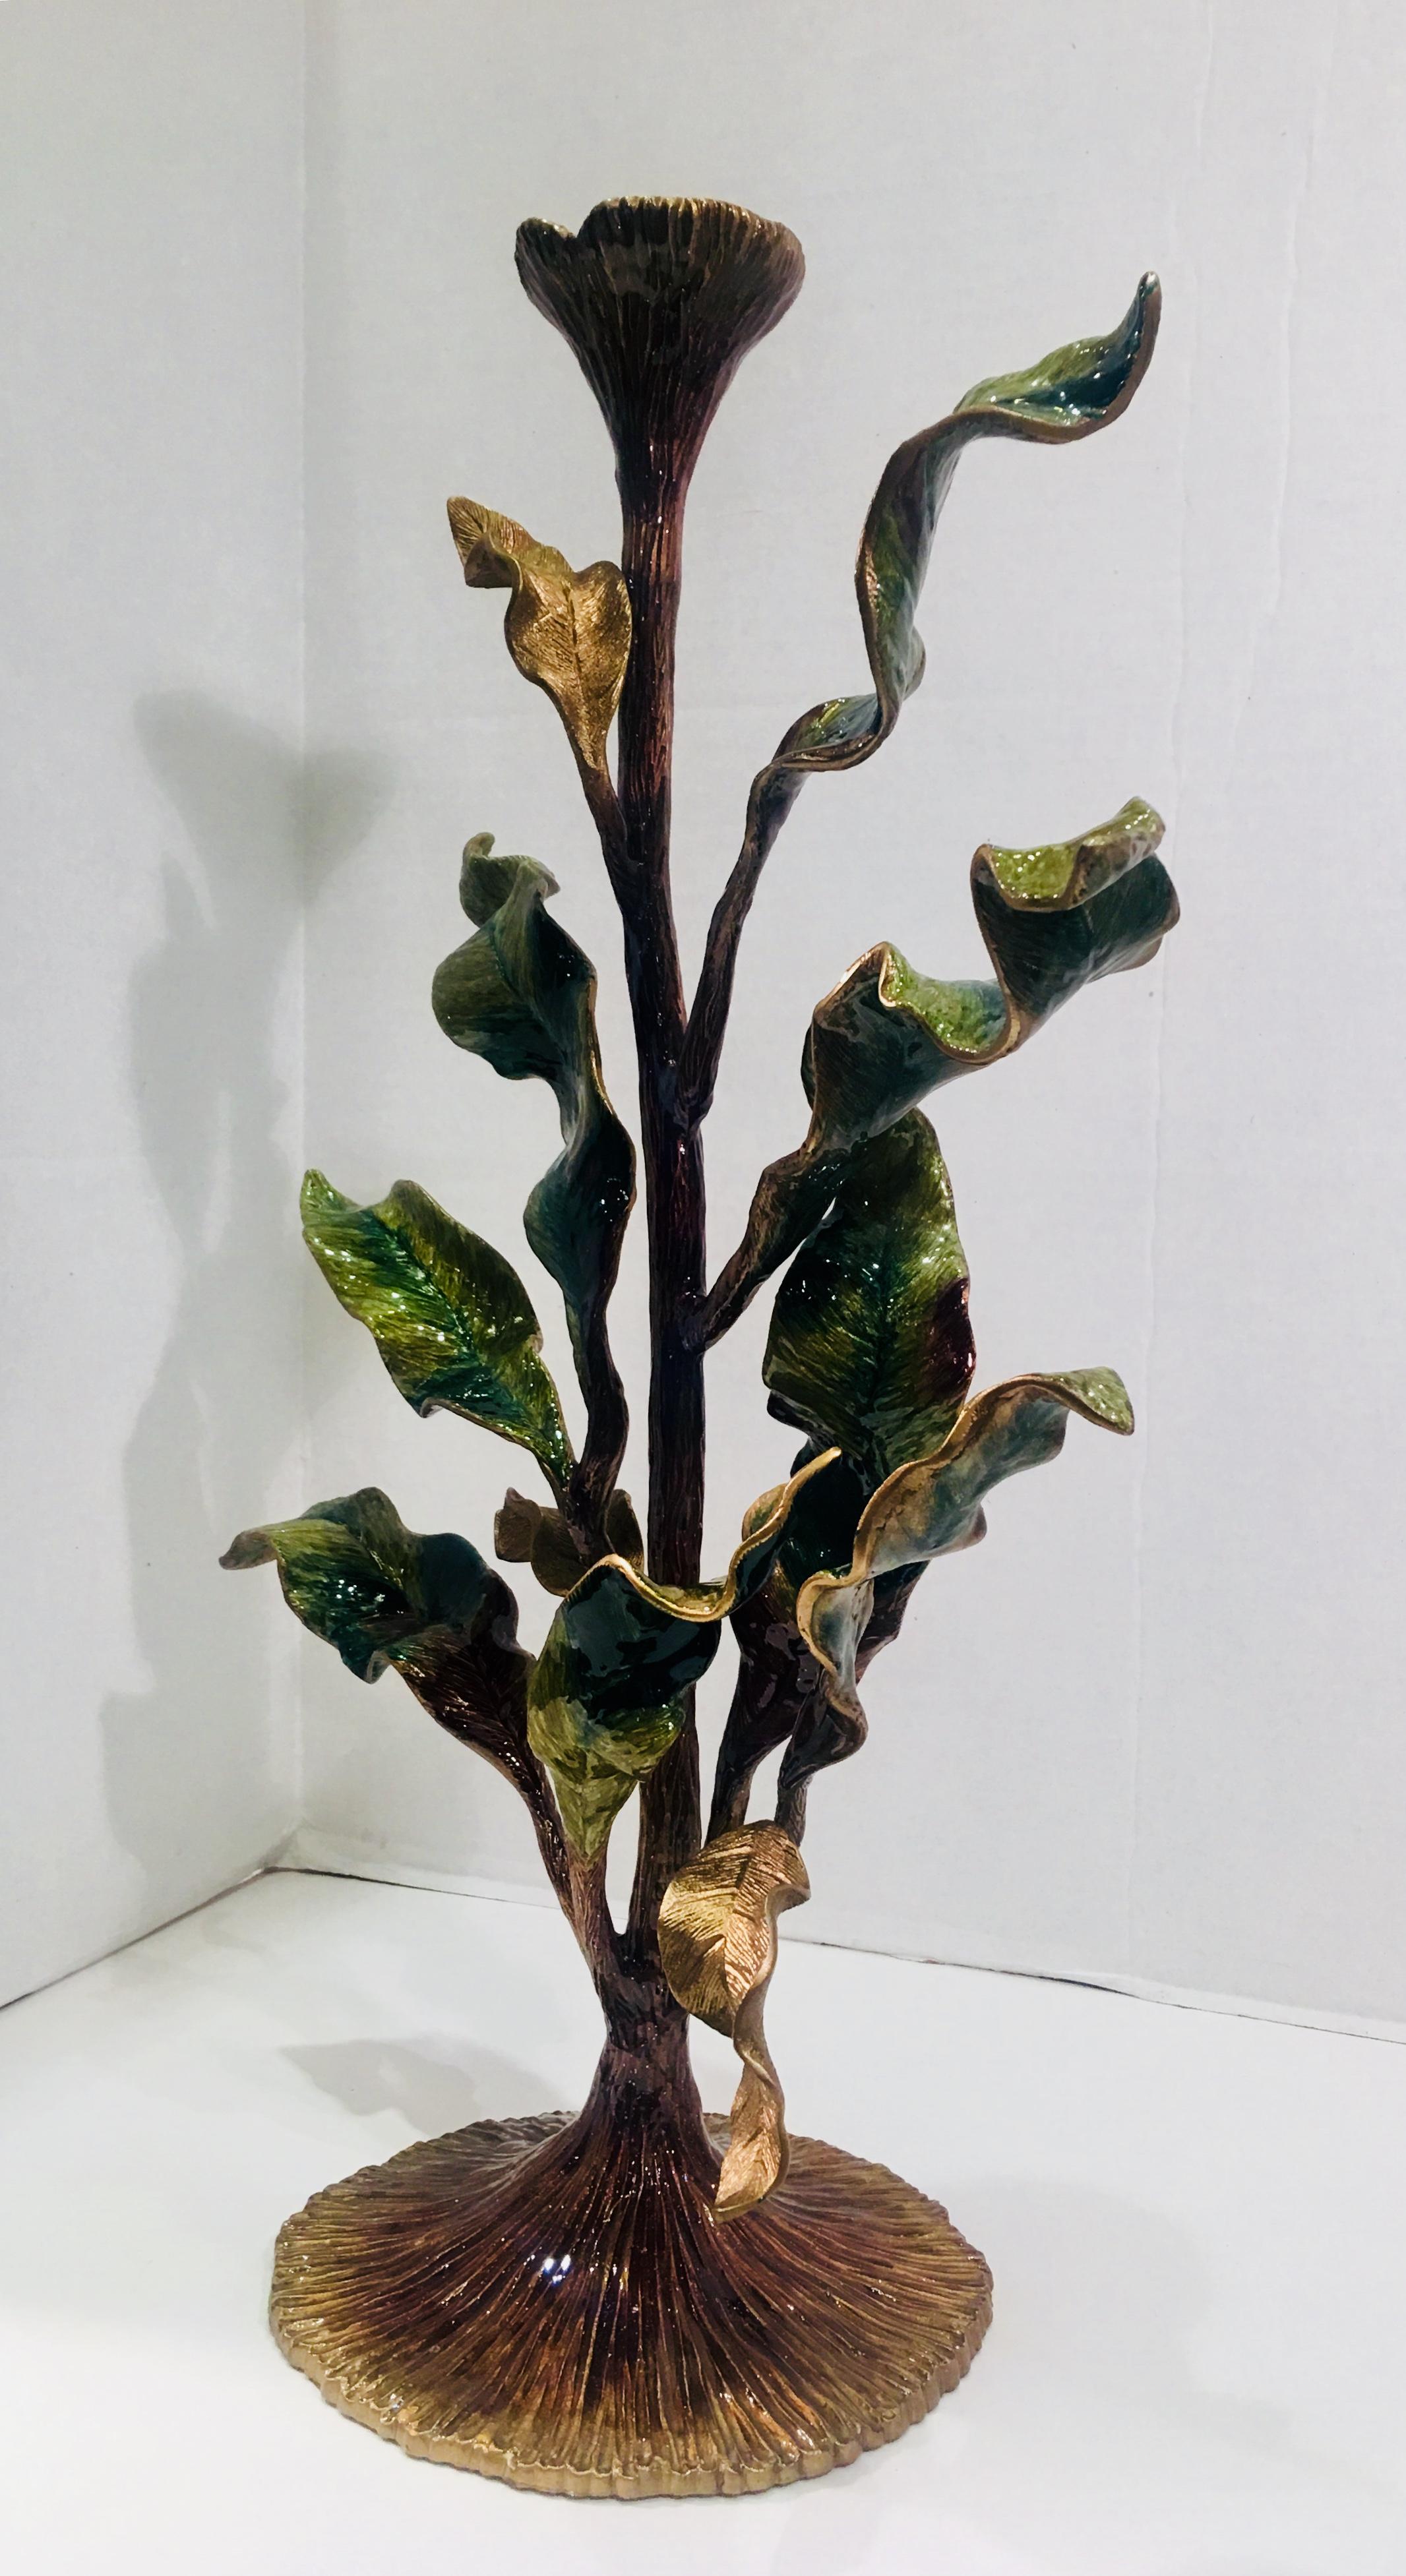 Exquisite Jay Strongwater Tall Undulating Leaves Enameled Metal Candleholder

Very large, elegant, leaf motif candleholder from the Jay Strongwater 